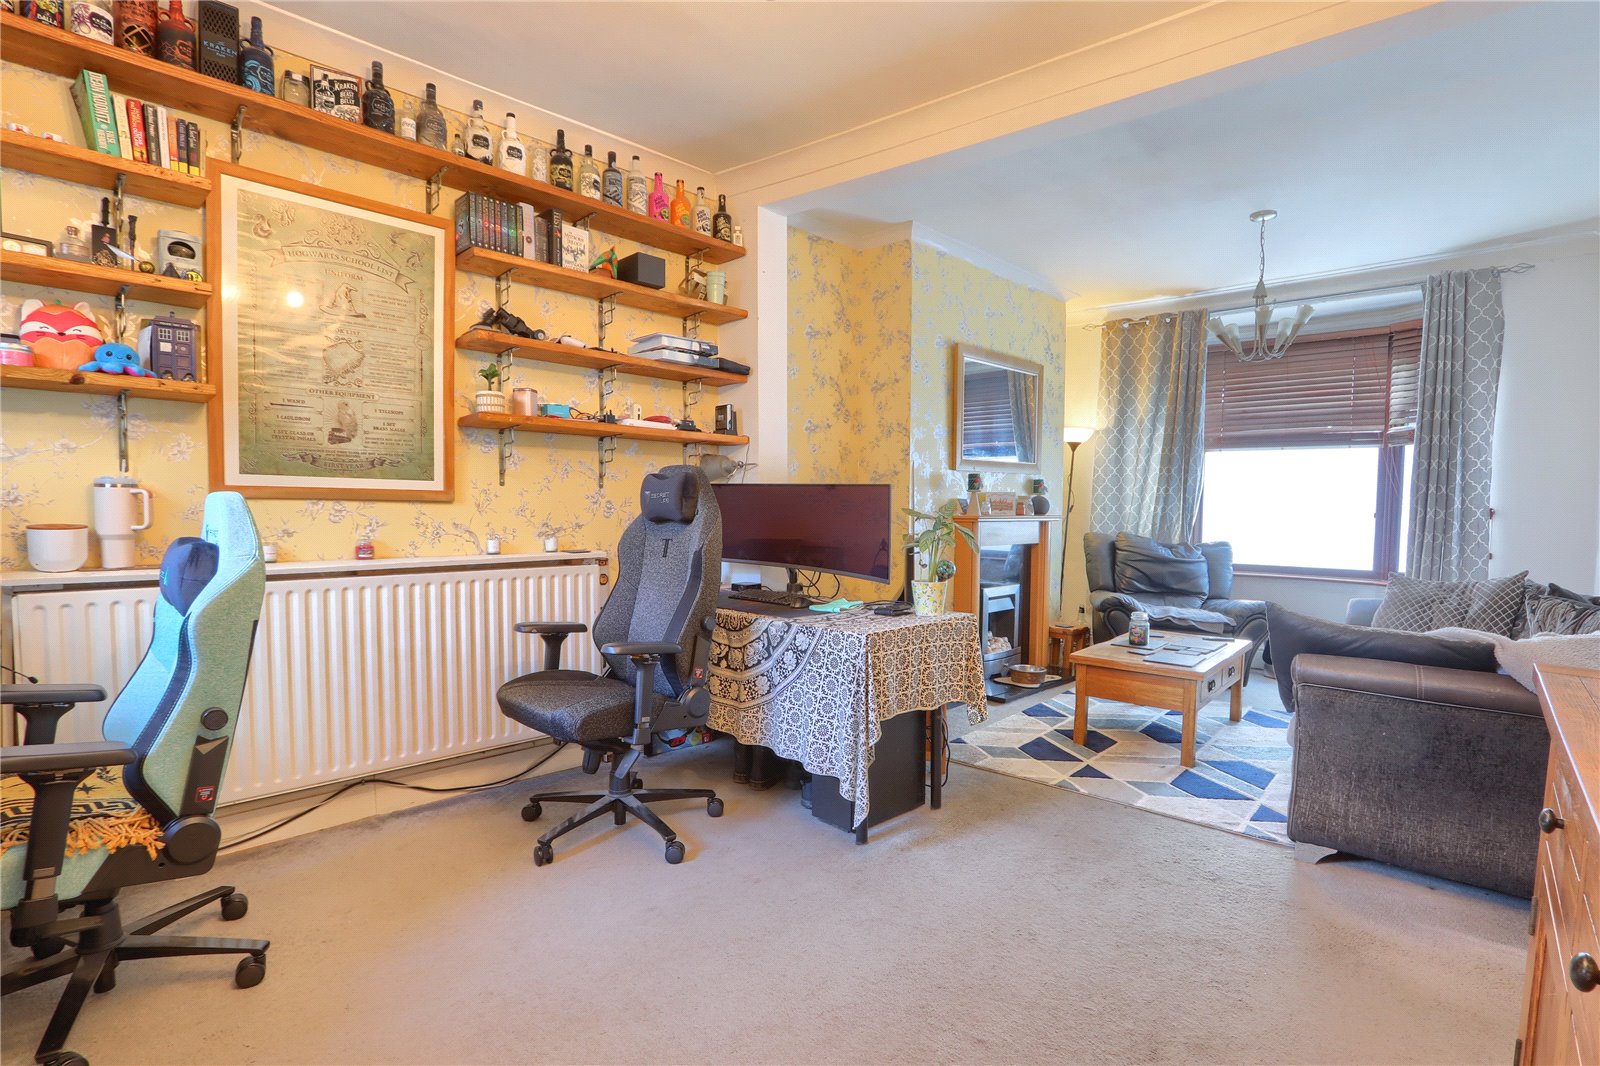 2 bed house for sale  - Property Image 3